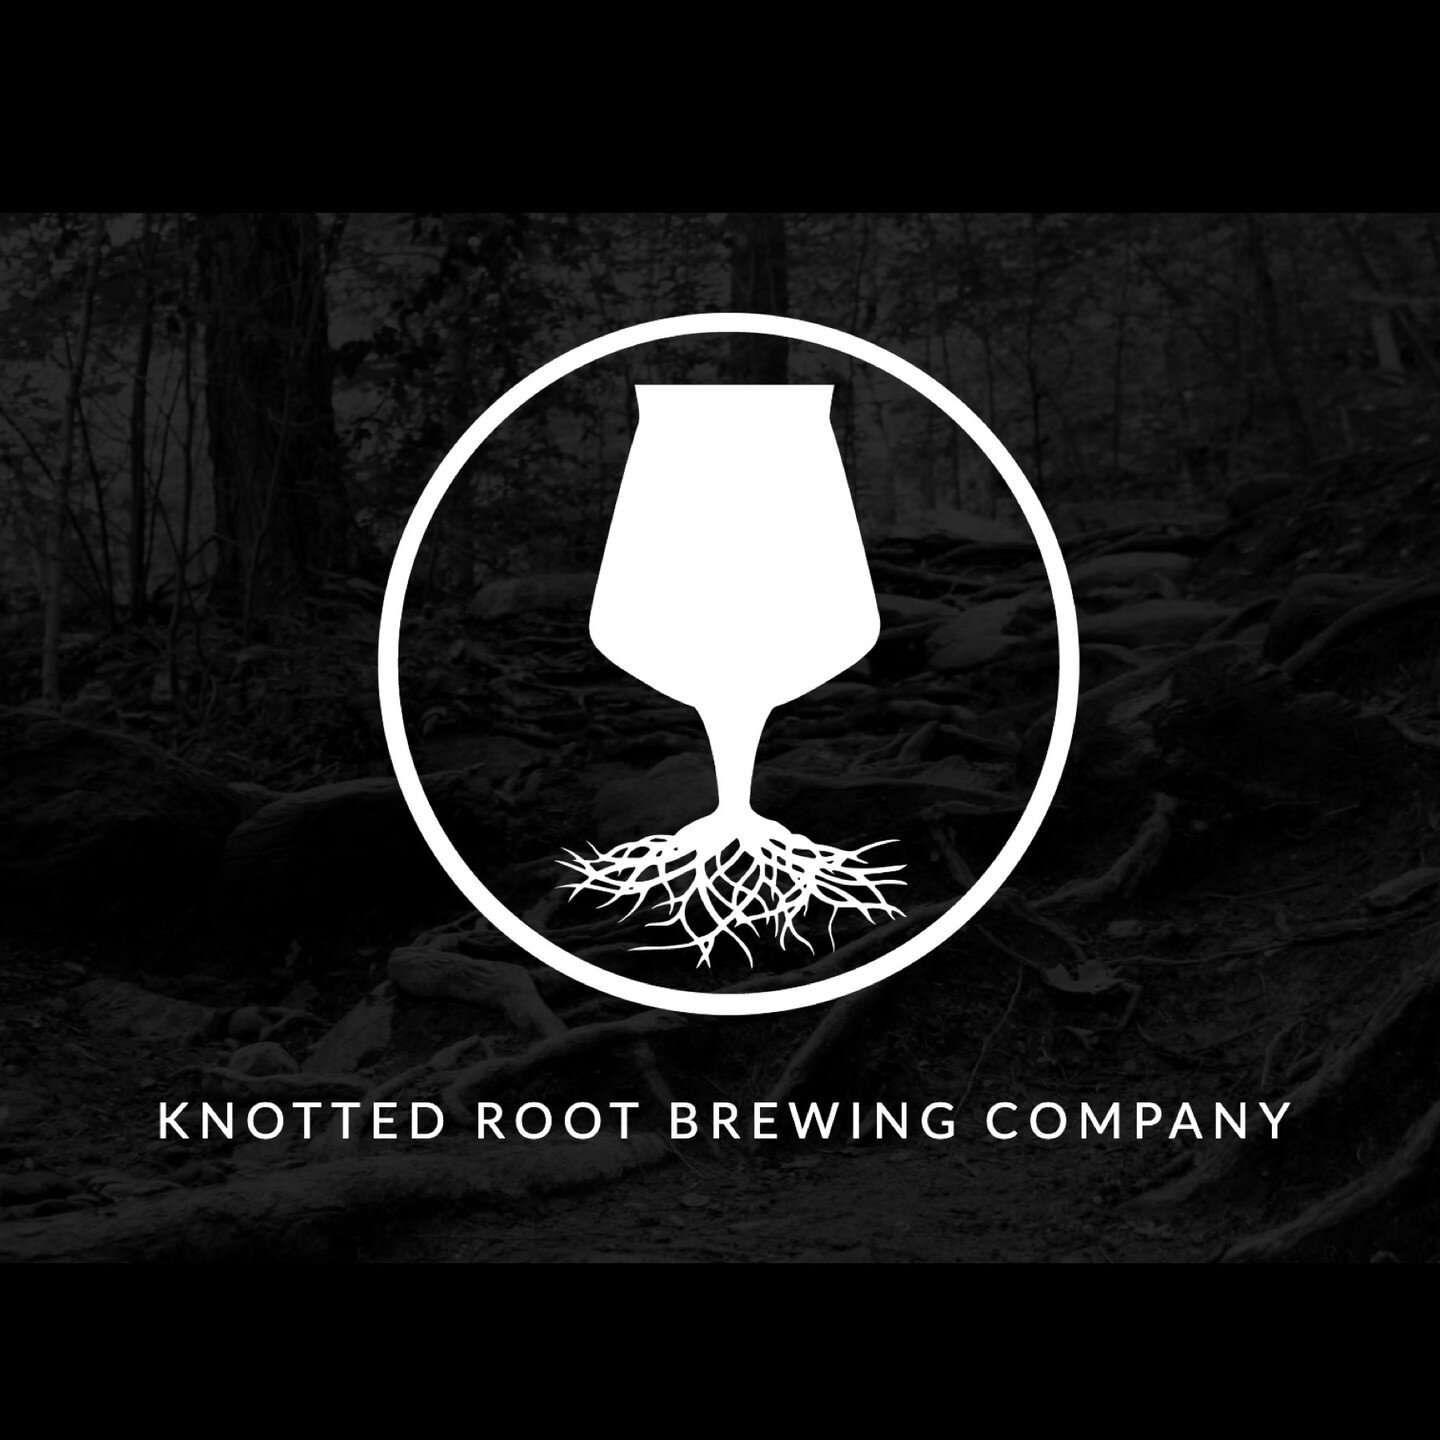 🔥🔥🔥
Just arriving...NEW, NEW, NEW..Knotted Root Brewing Company, Nederland, CO!! 
@knottedrootbrewing 

16oz CAN
Knotted Root Brewing, Home - CANS, American Lager with American malt and classic noble hops, 5.0% ABV, 6/4/16oz 

16oz
Knotted Root Br